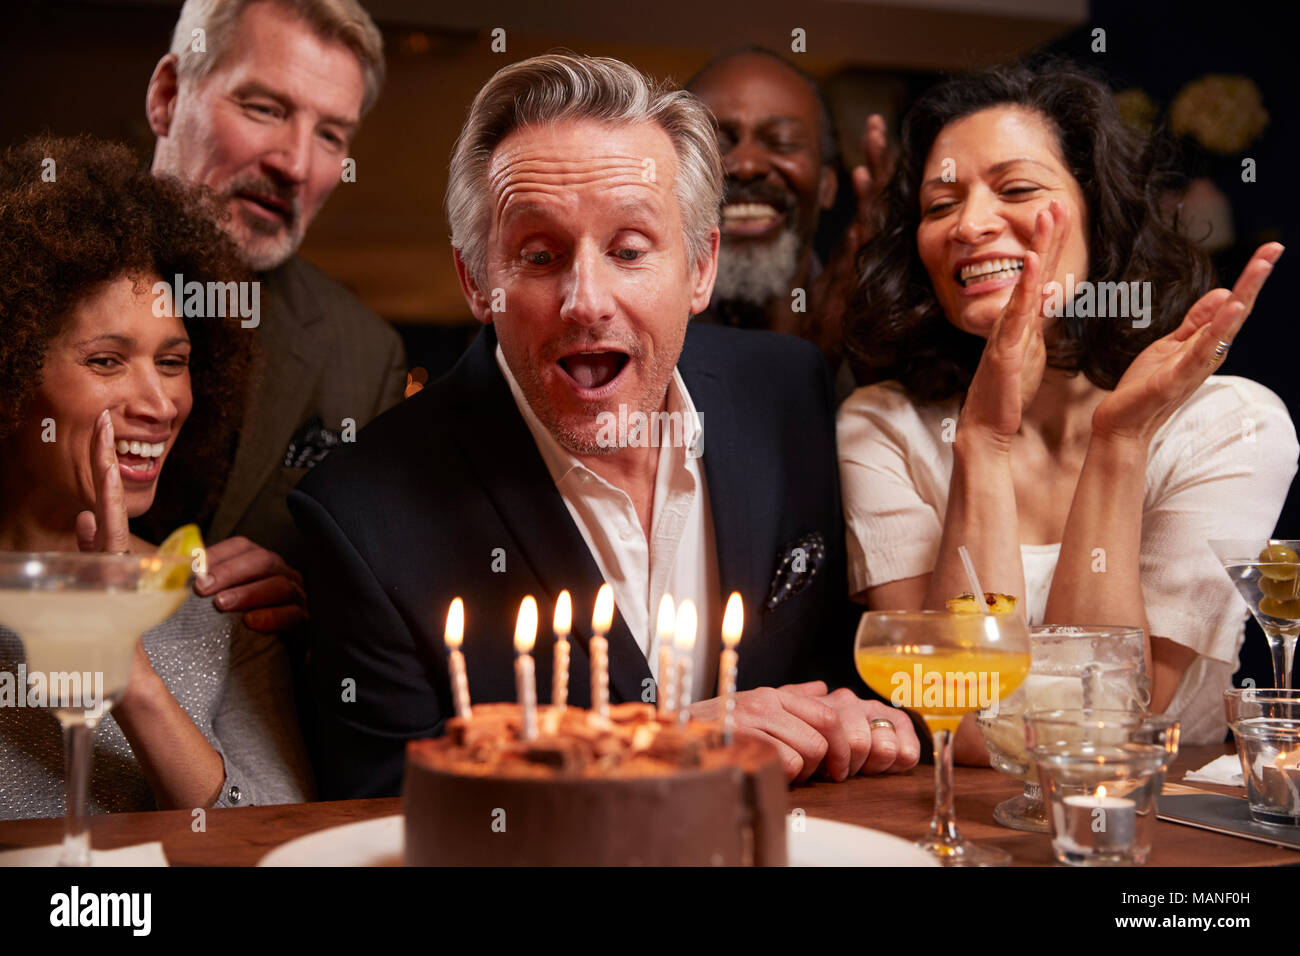 Group Of Middle Aged Friends Celebrating Birthday In Bar Stock Photo